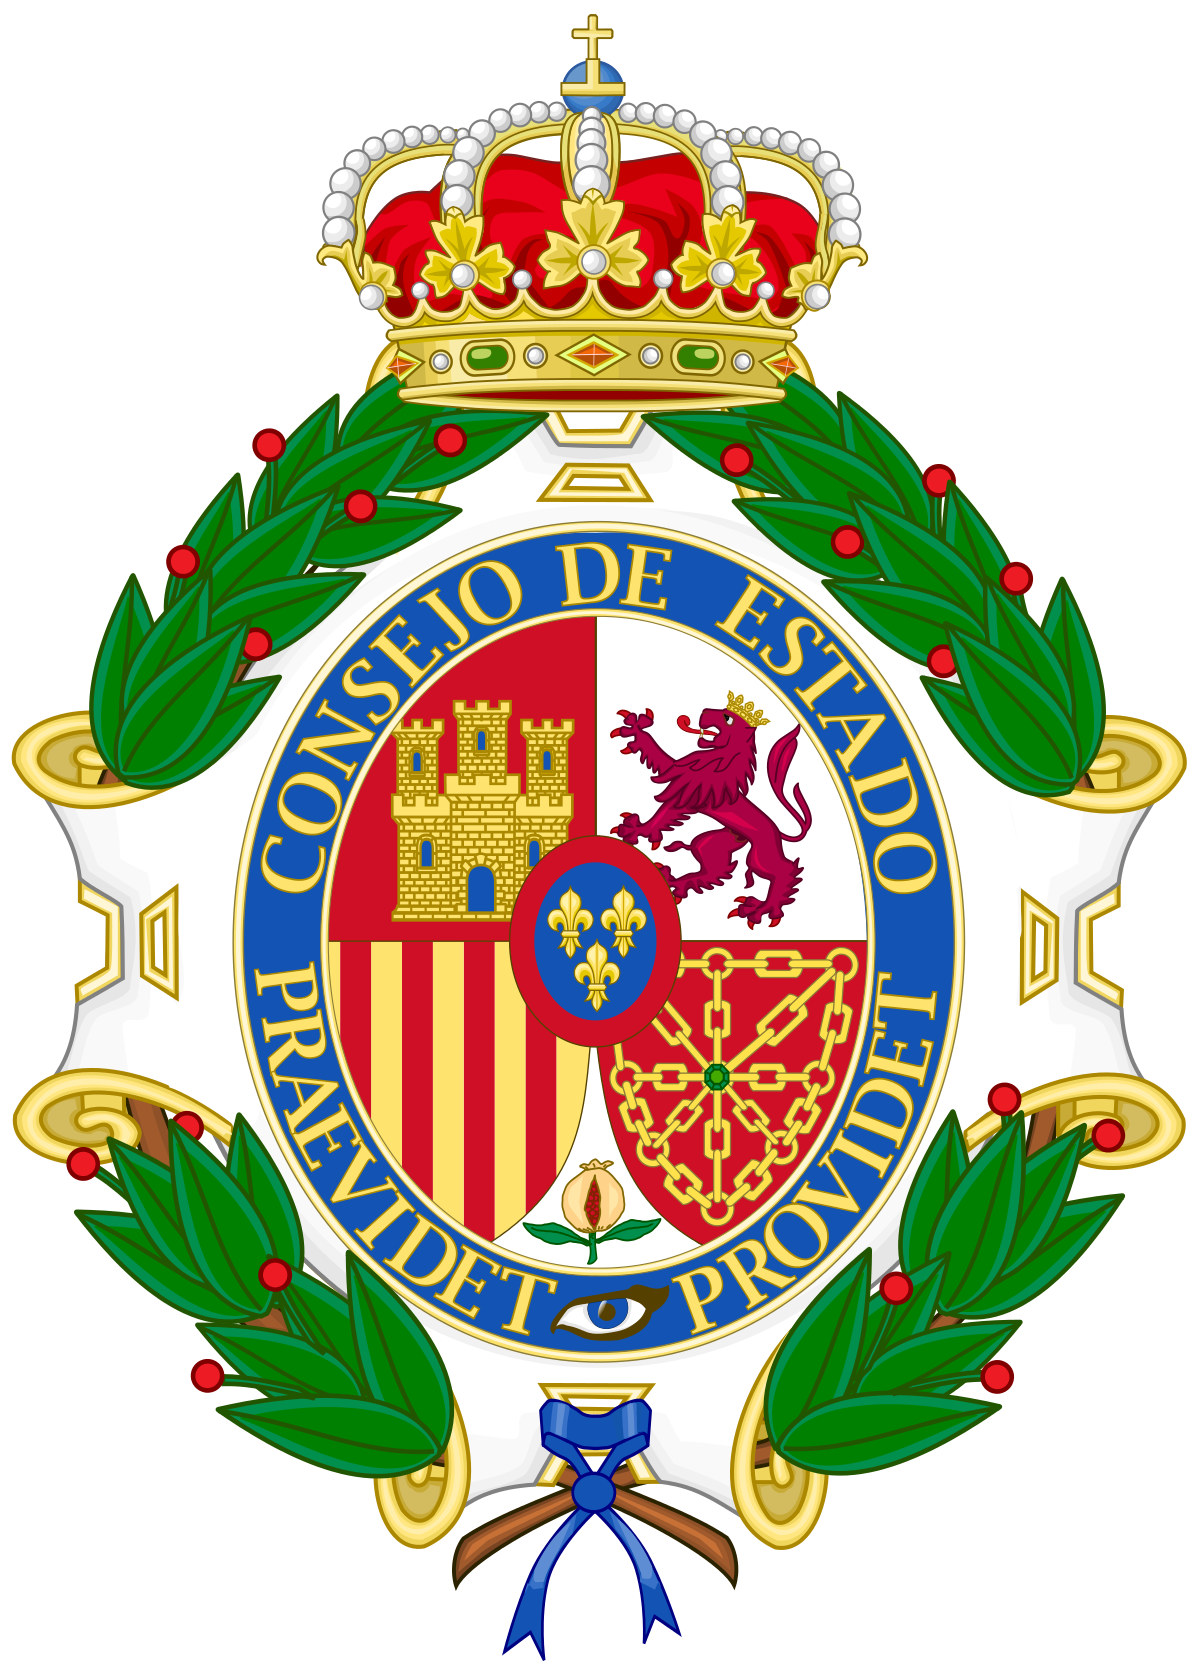 Spanish Council of State - Wikipedia